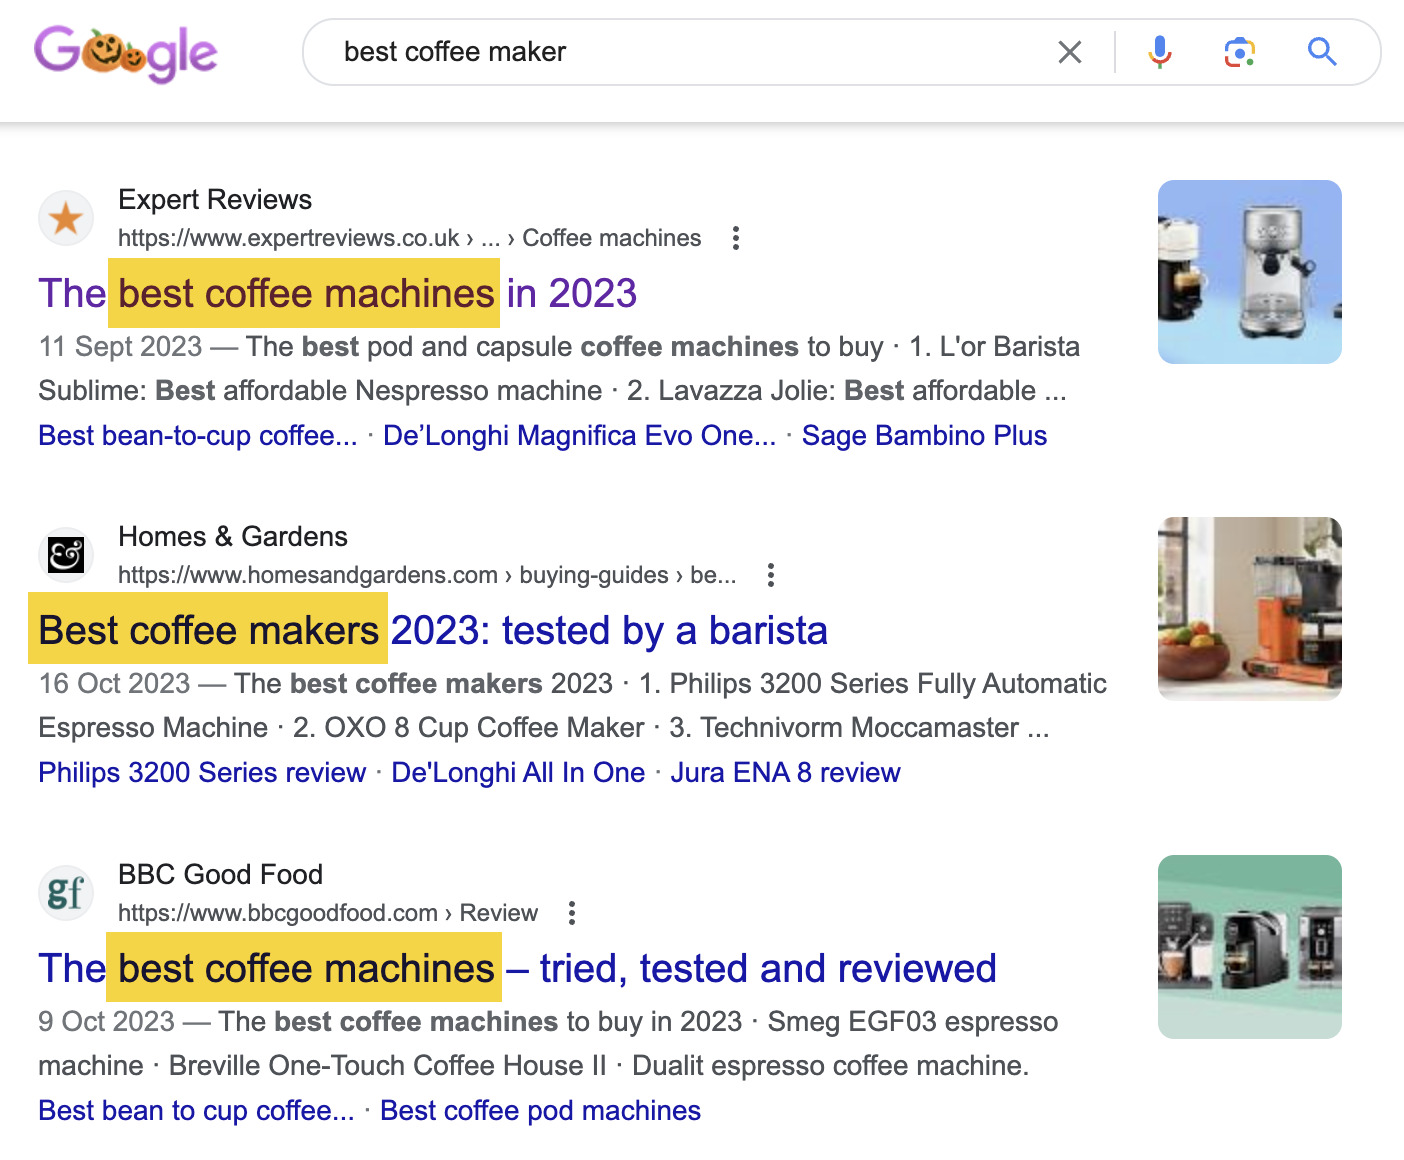 Google search results for "best coffee maker" 